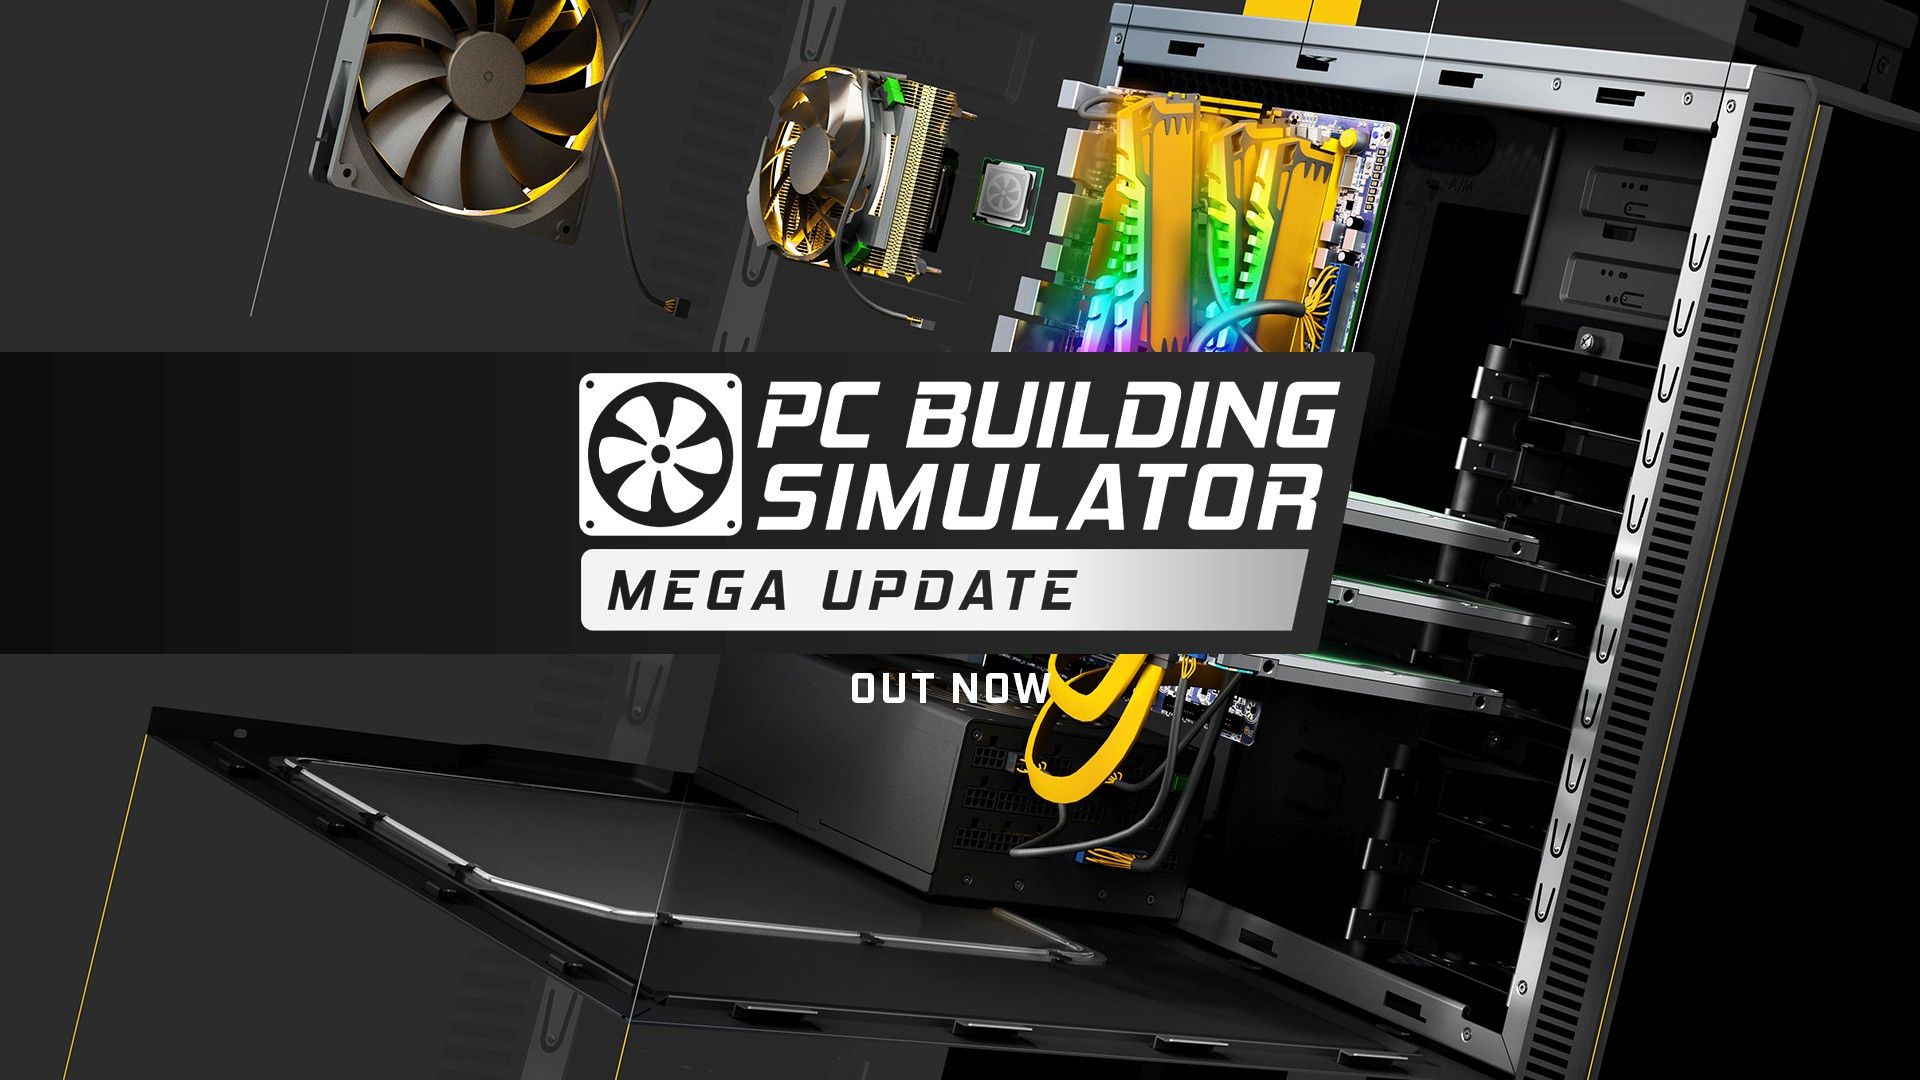 PC Building Simulator: Mega Update Available Now